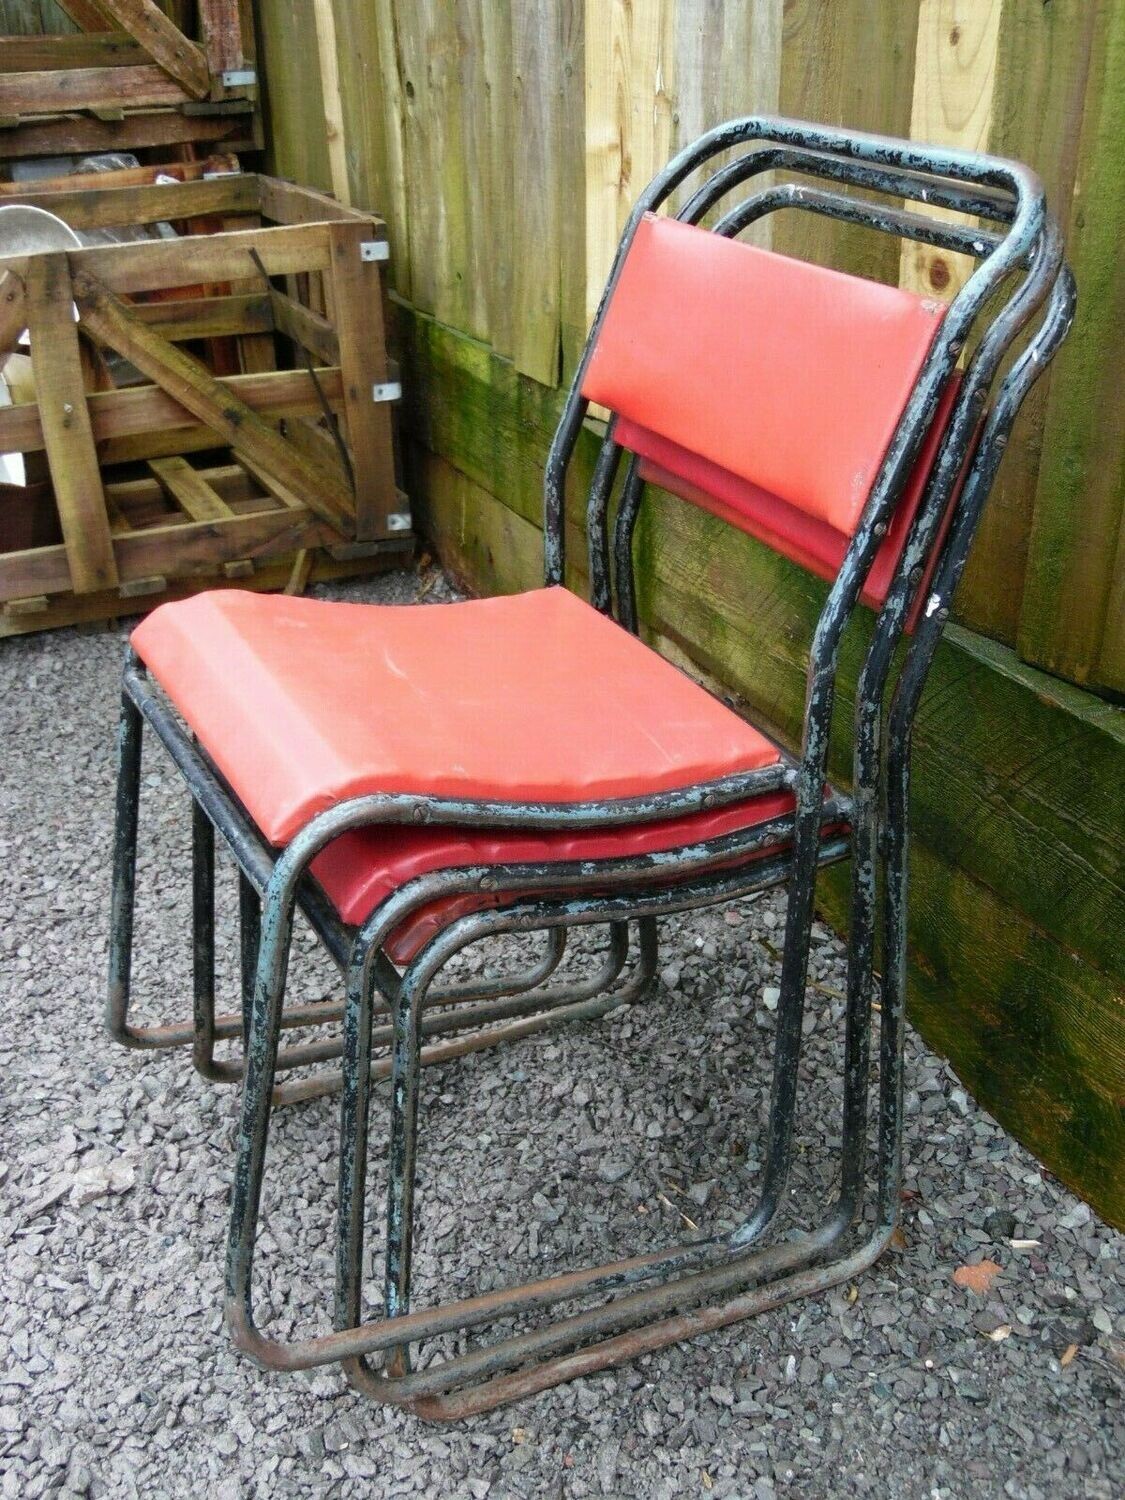 Reclaimed AIR MINISTRY Tubular Steel Stacking Chairs !!!! SOLD ON EBAY !!!!